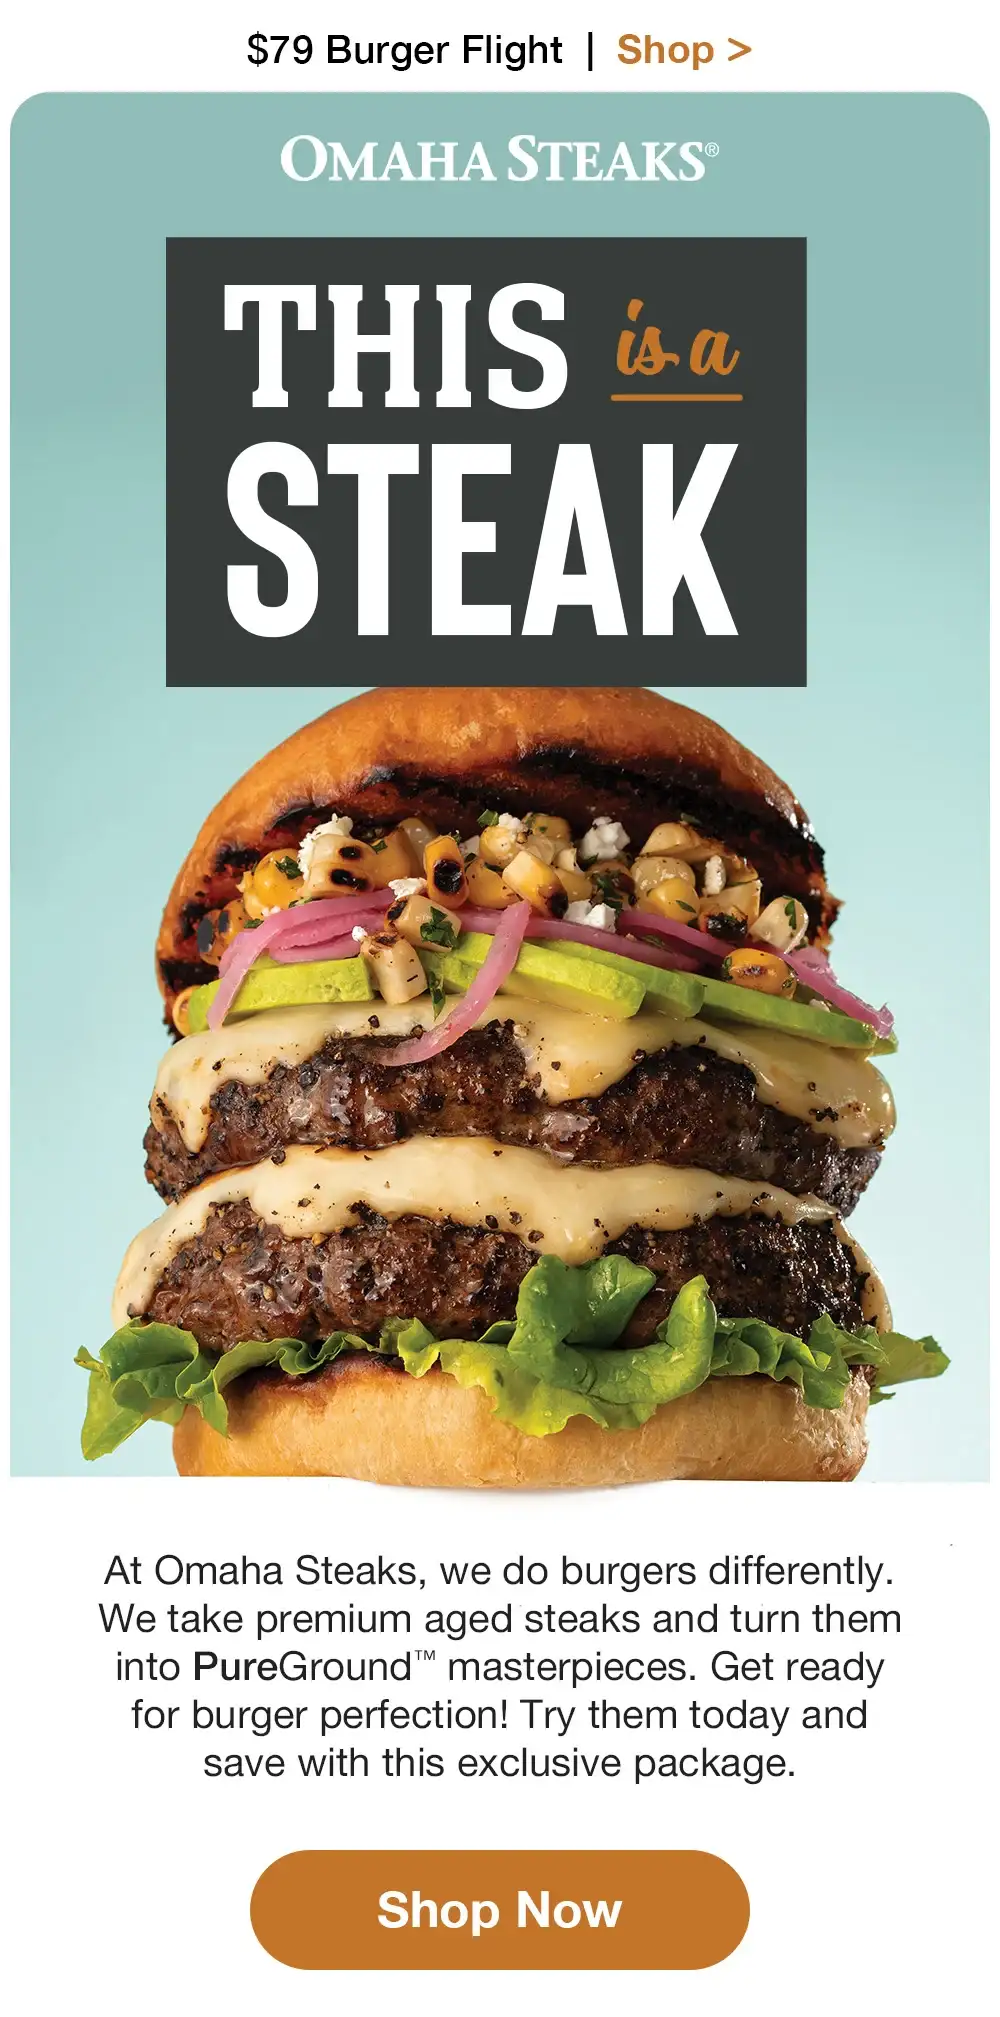 \\$79 Burger Flight + Free Shipping | Shop > OMAHA STEAKS® | THIS is a STEAK At Omaha Steaks, we do burgers differently. We take premium aged steaks and turn them into PureGround™ masterpieces. Get ready for burger perfection! Try them today and save with this exclusive package. || Shop Now